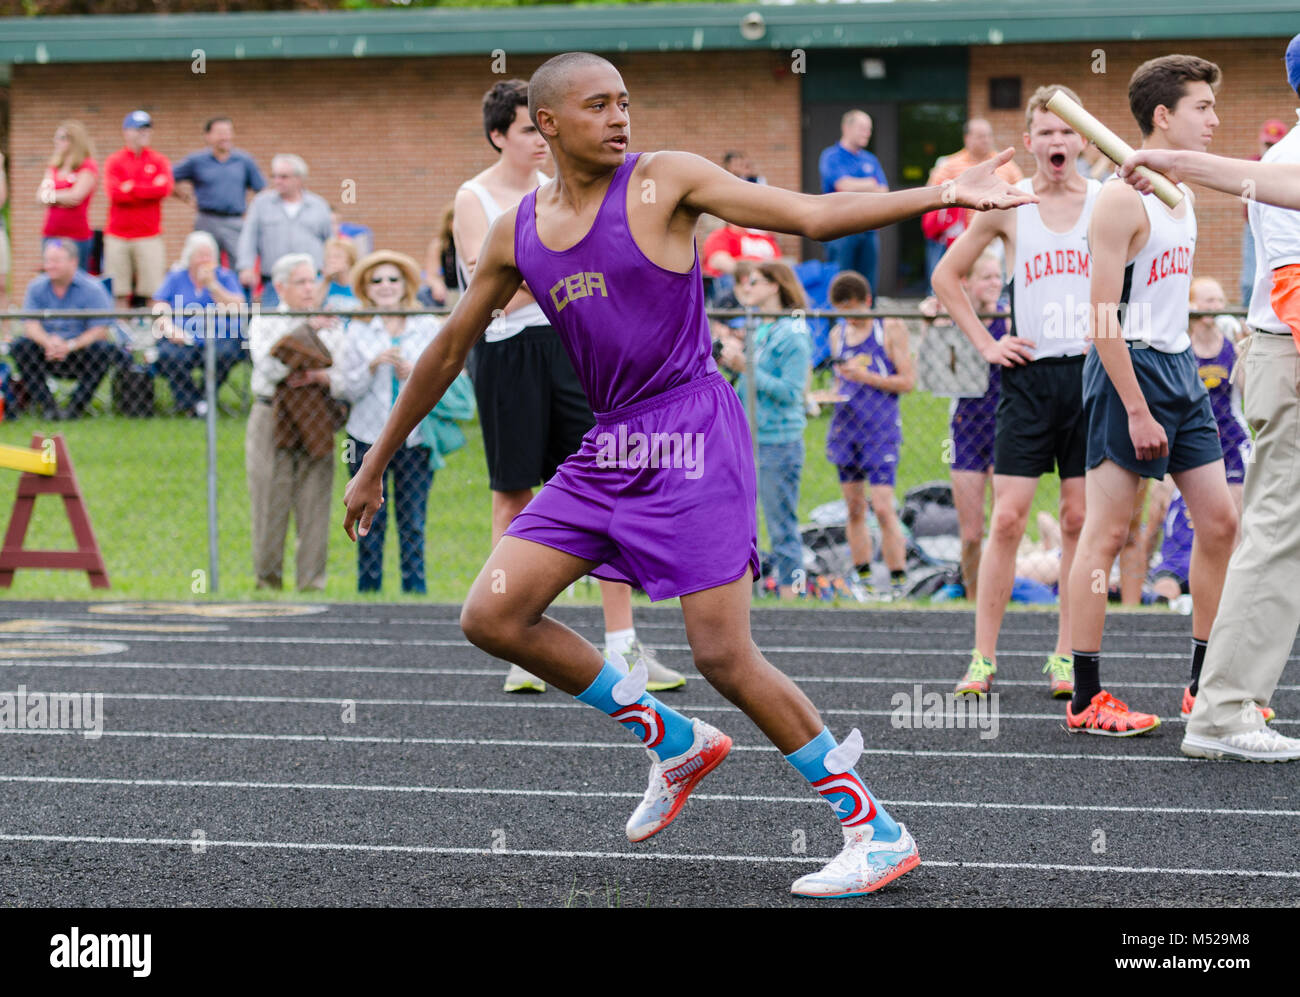 Teen boy accepts baton in relay race at outdoor track and field meet in Albany, NY on May 14, 2015. Stock Photo